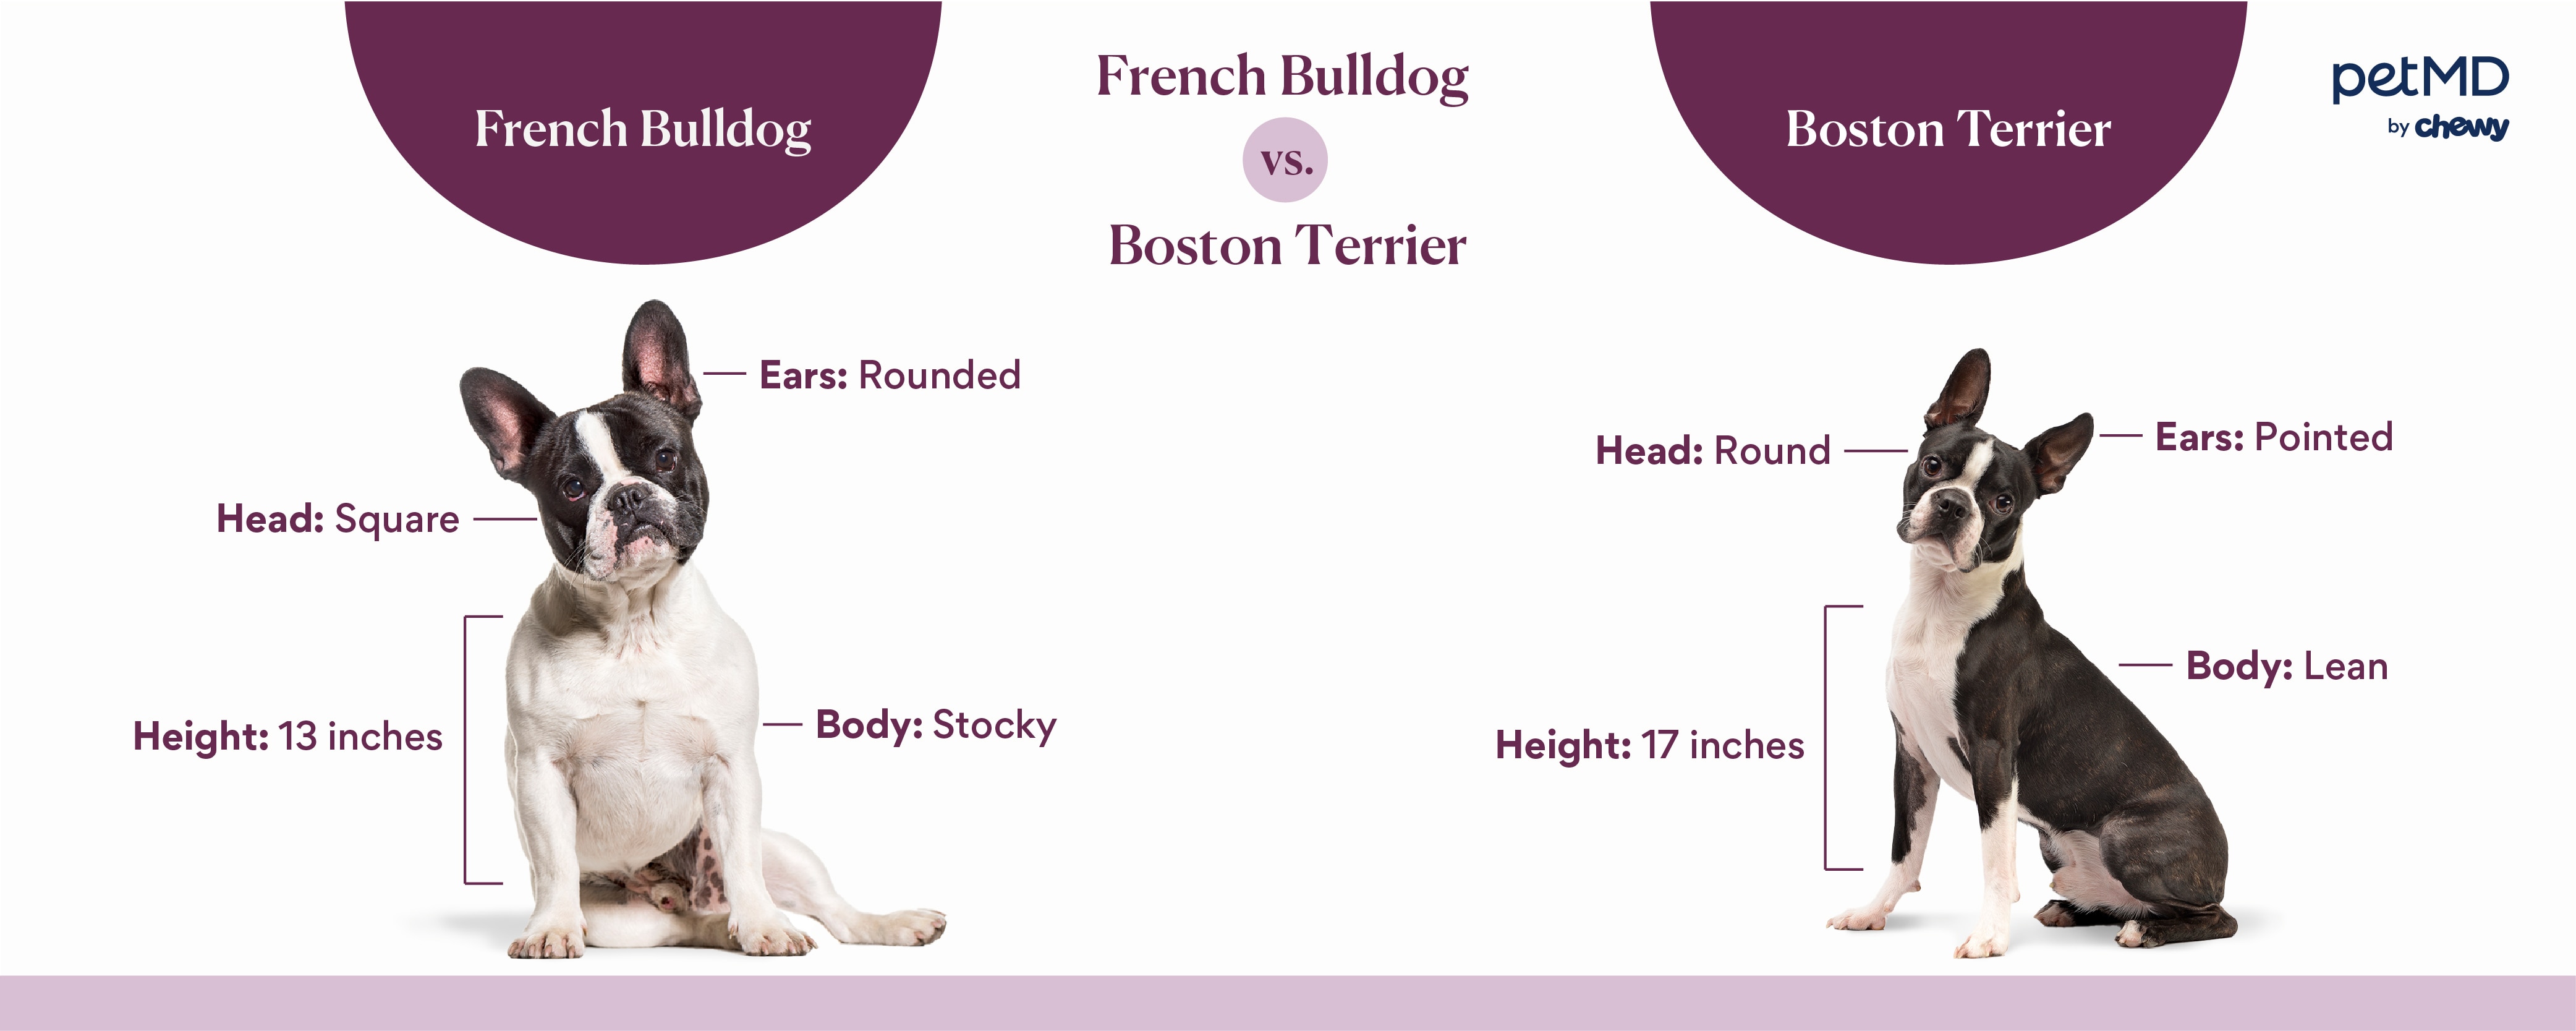 graphic illustrating the differences between french bulldog and boston terrier dog breeds